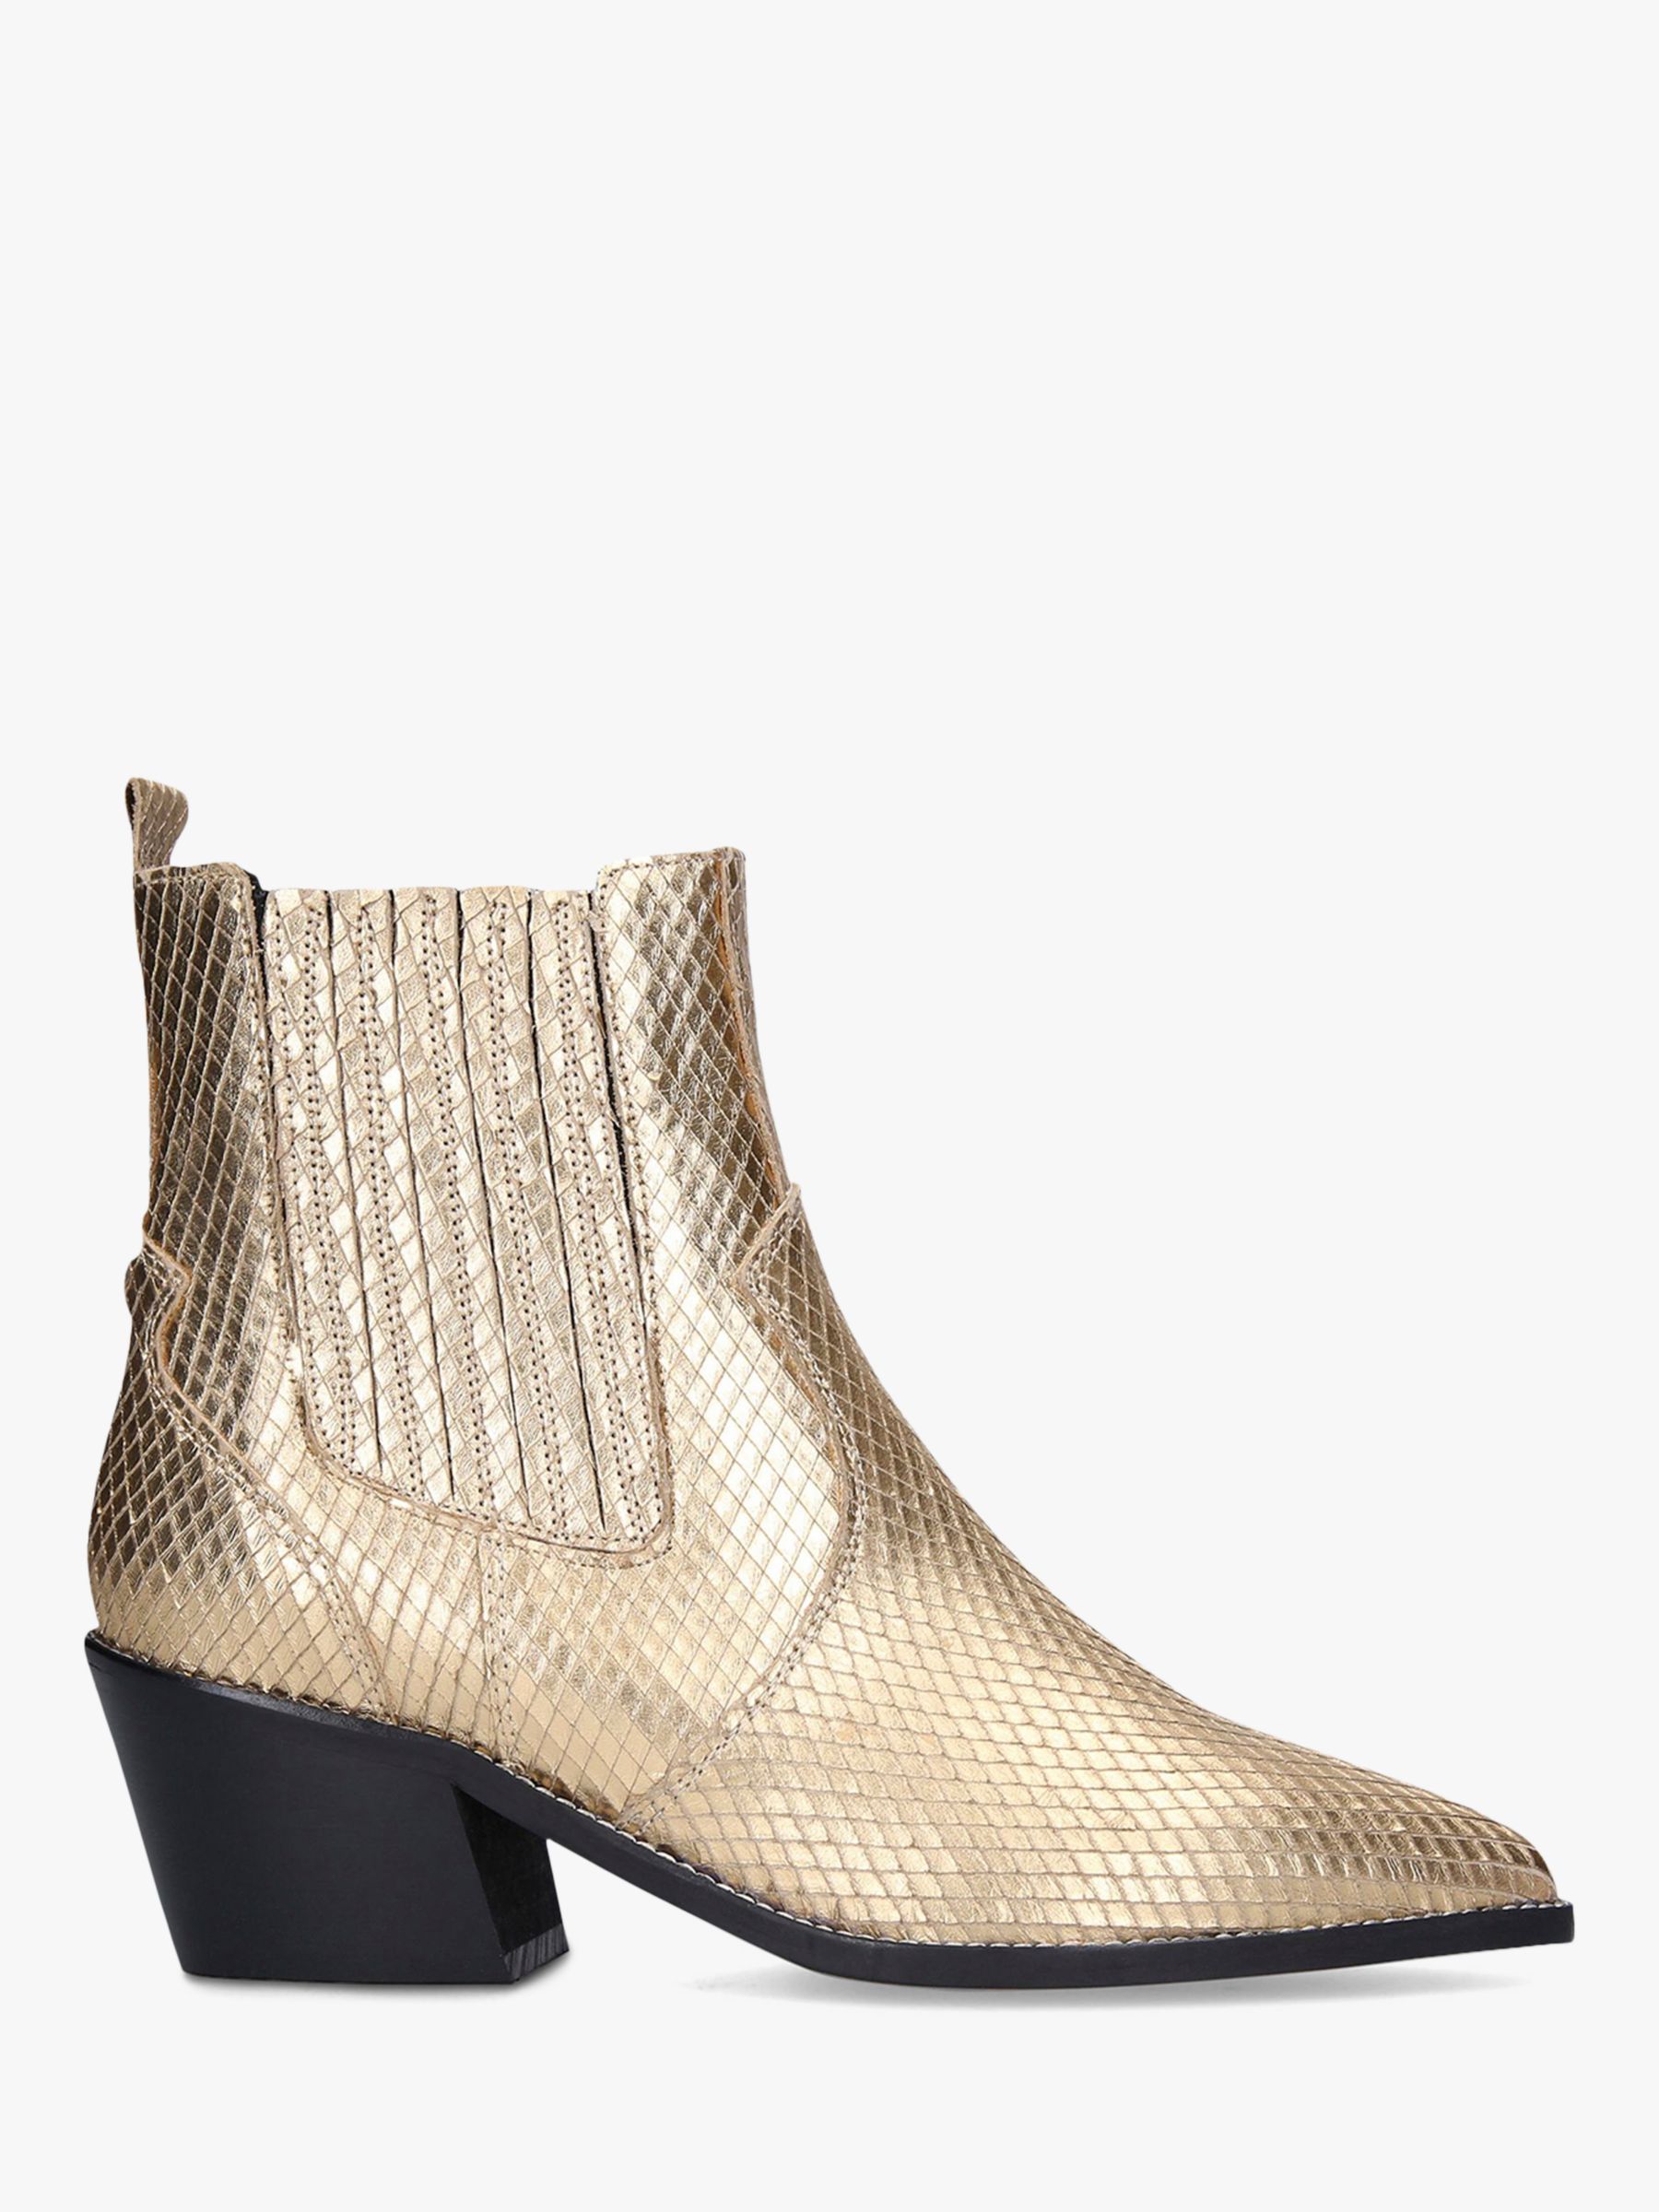 Carvela Stella Leather Western Style Ankle Boots, Gold, 3